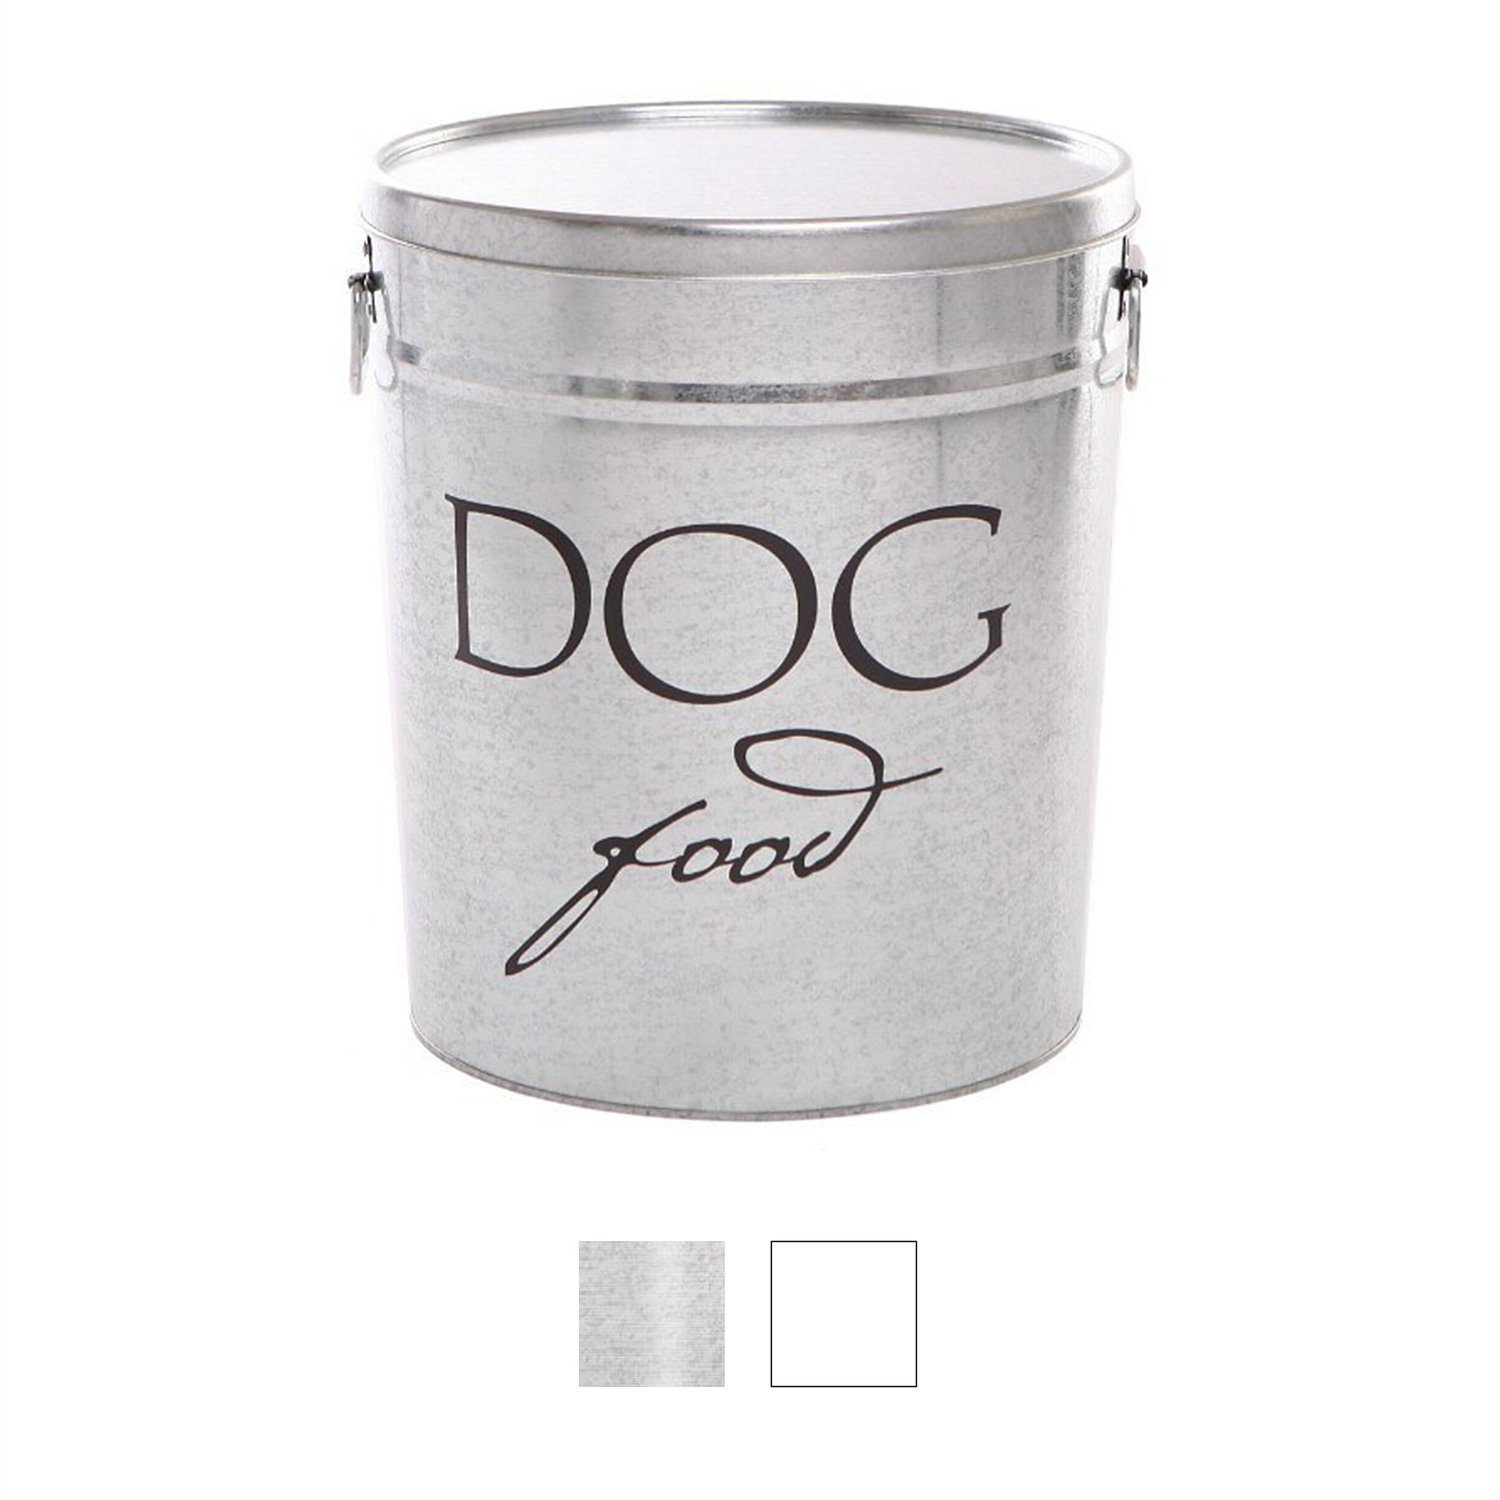 HARRY BARKER Classic Dog Food Storage Canister, Silver, Medium - Chewy.com